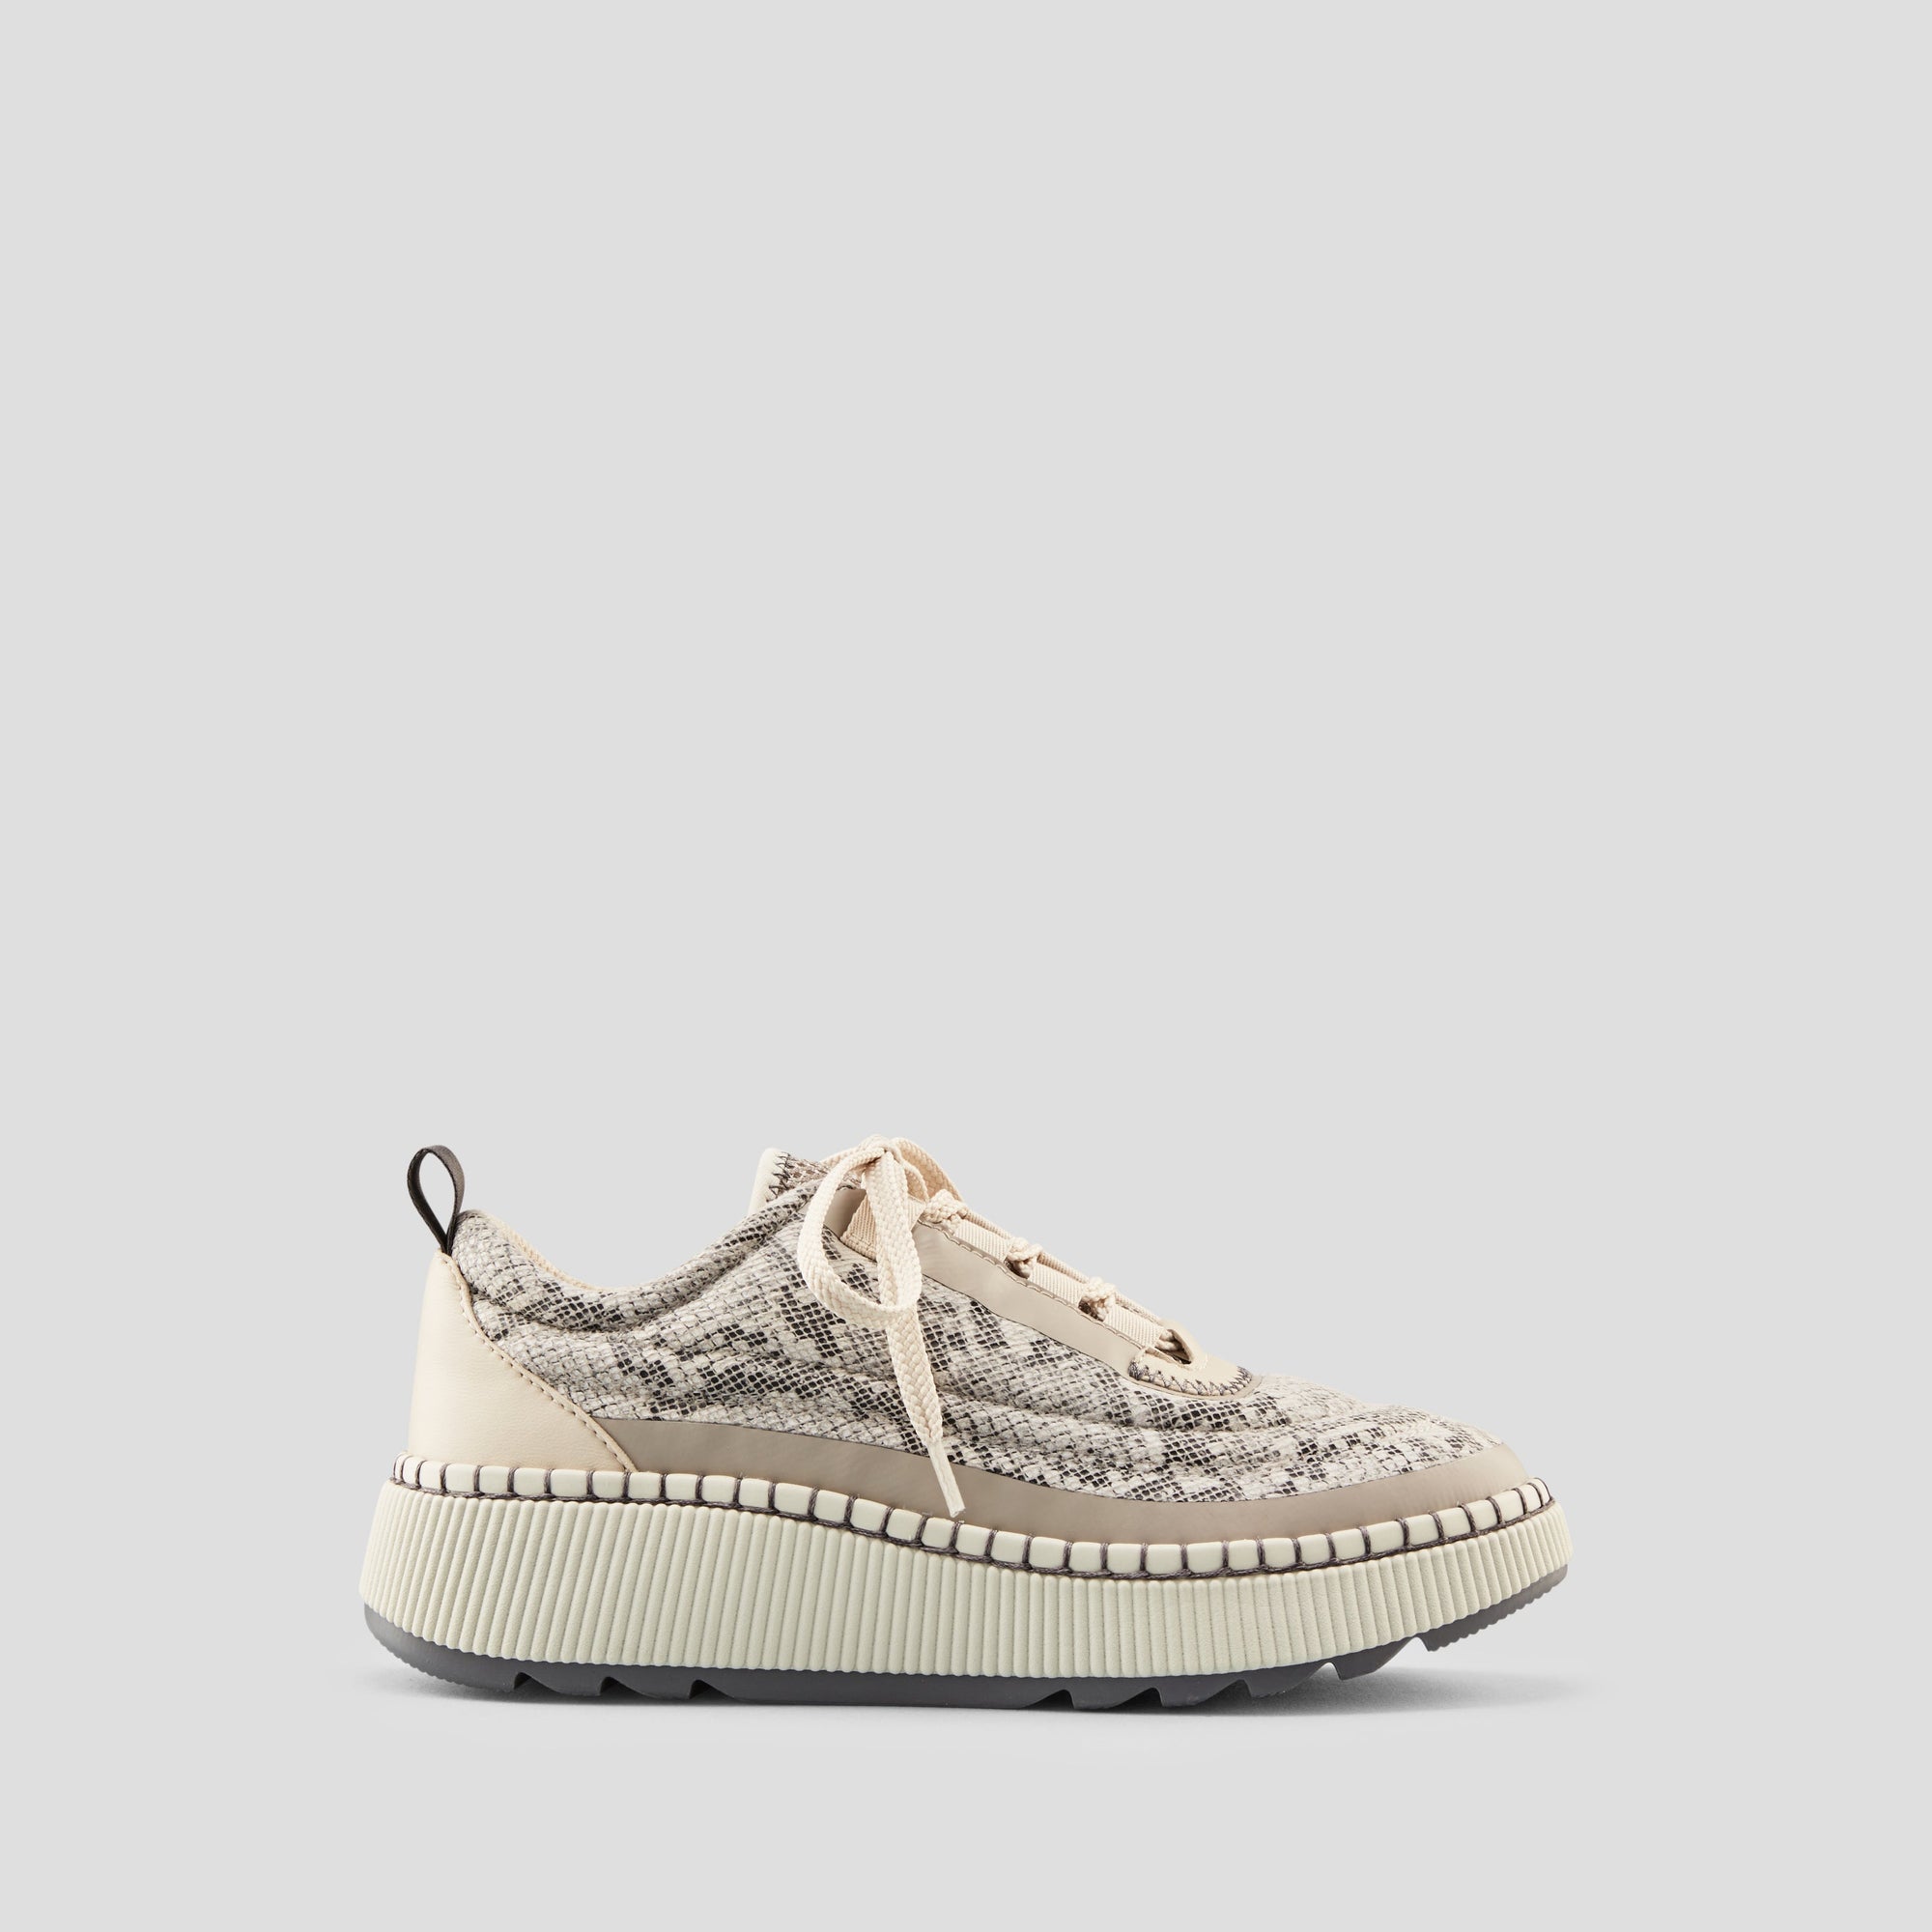 Sayah Luxmotion Nylon and Leather Print Waterproof Sneaker - Colour Taupe Snake